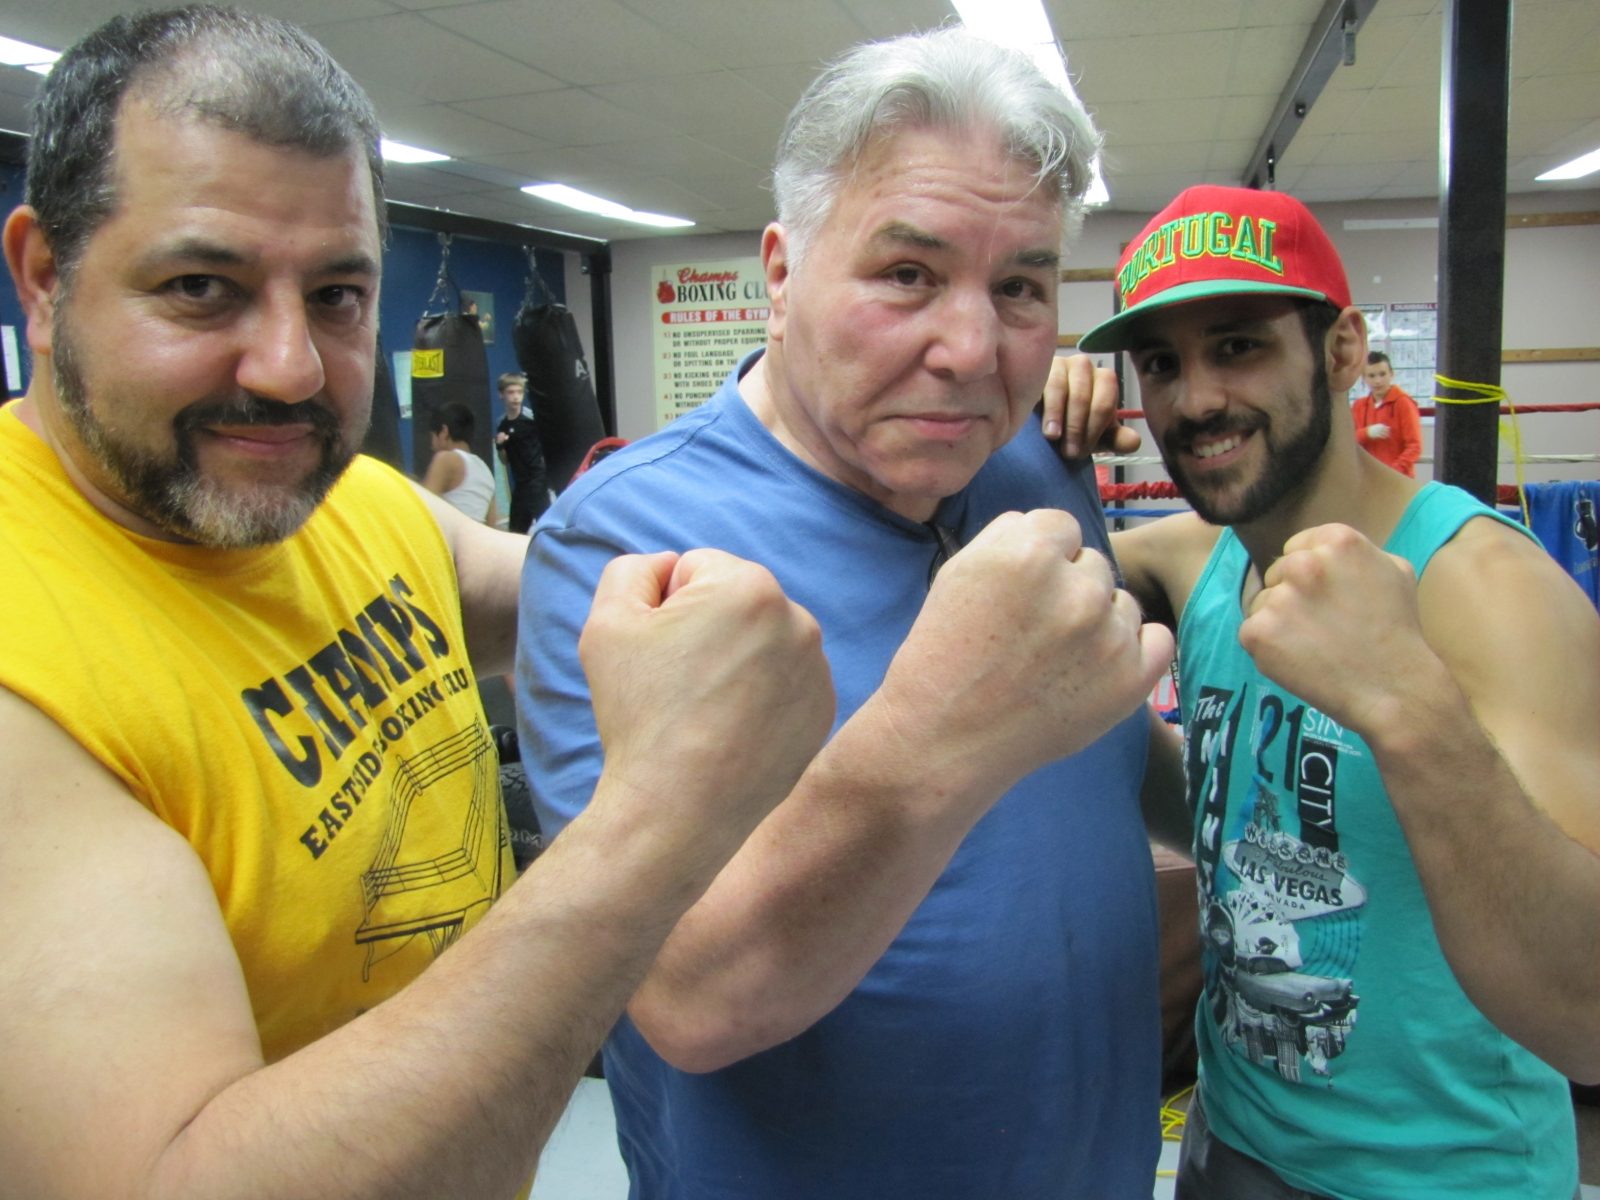 GEORGE CHUVALO: Boxing has nothing to fear from mixed martial arts